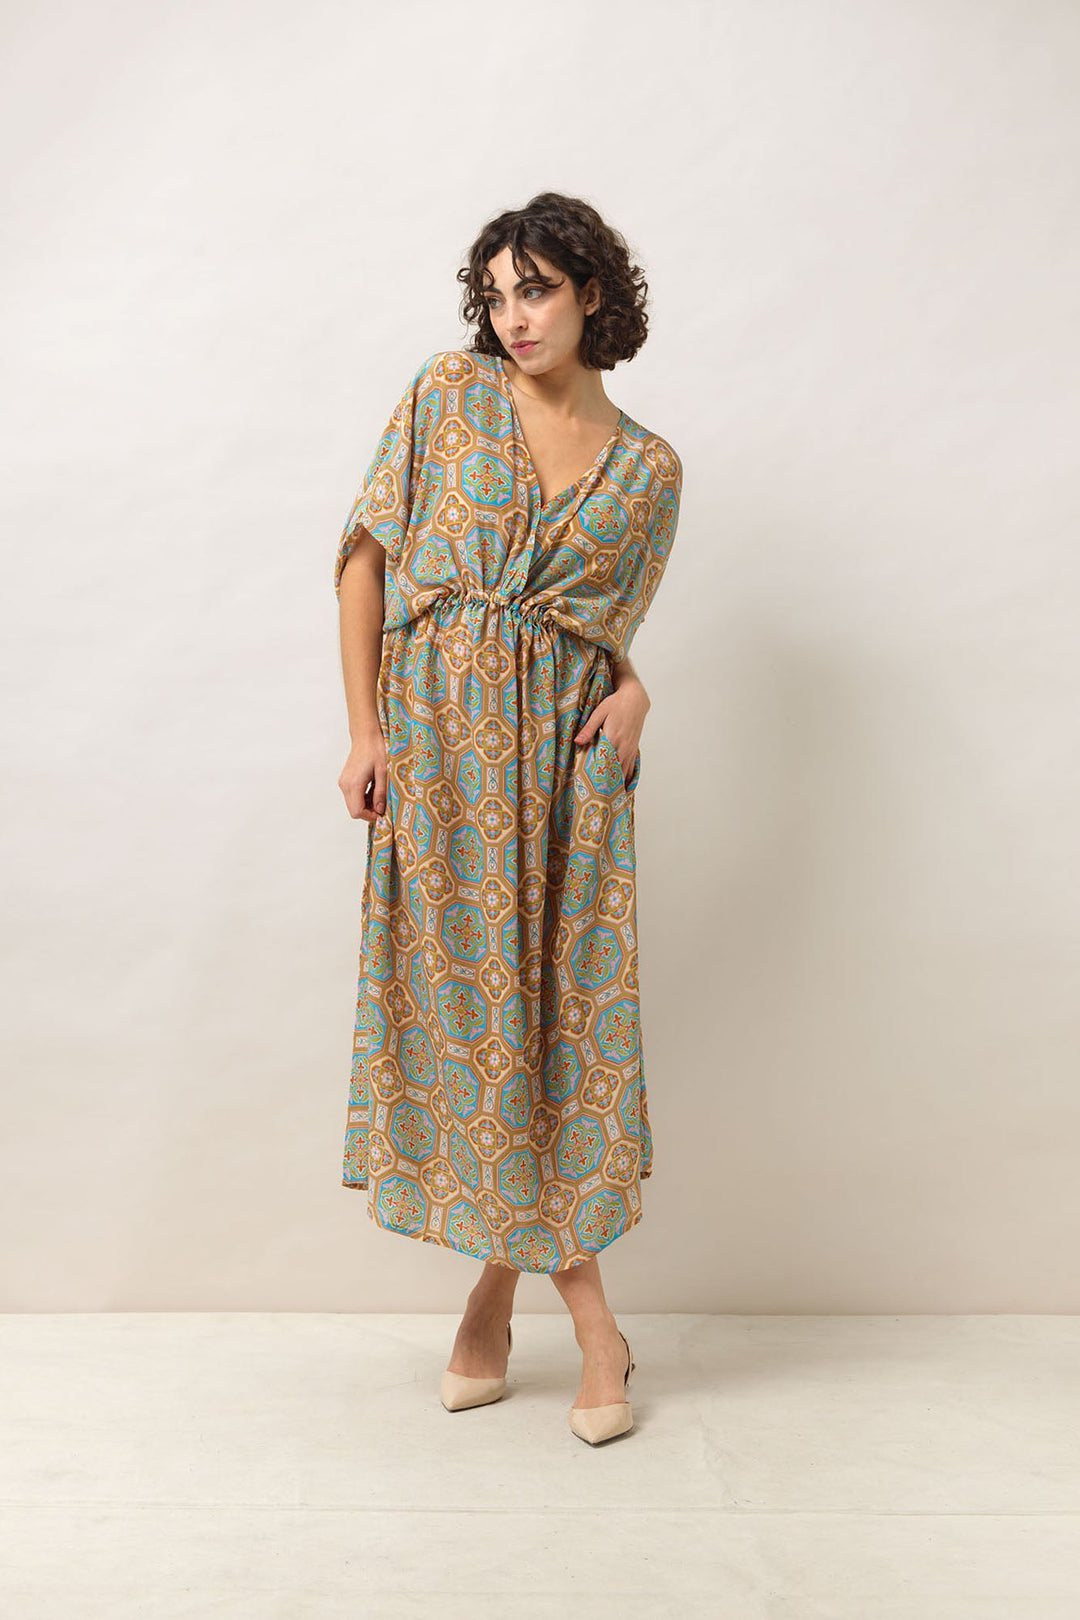 Women's lightweight beach cover up dress in vintage tiles blue print by One Hundred Stars